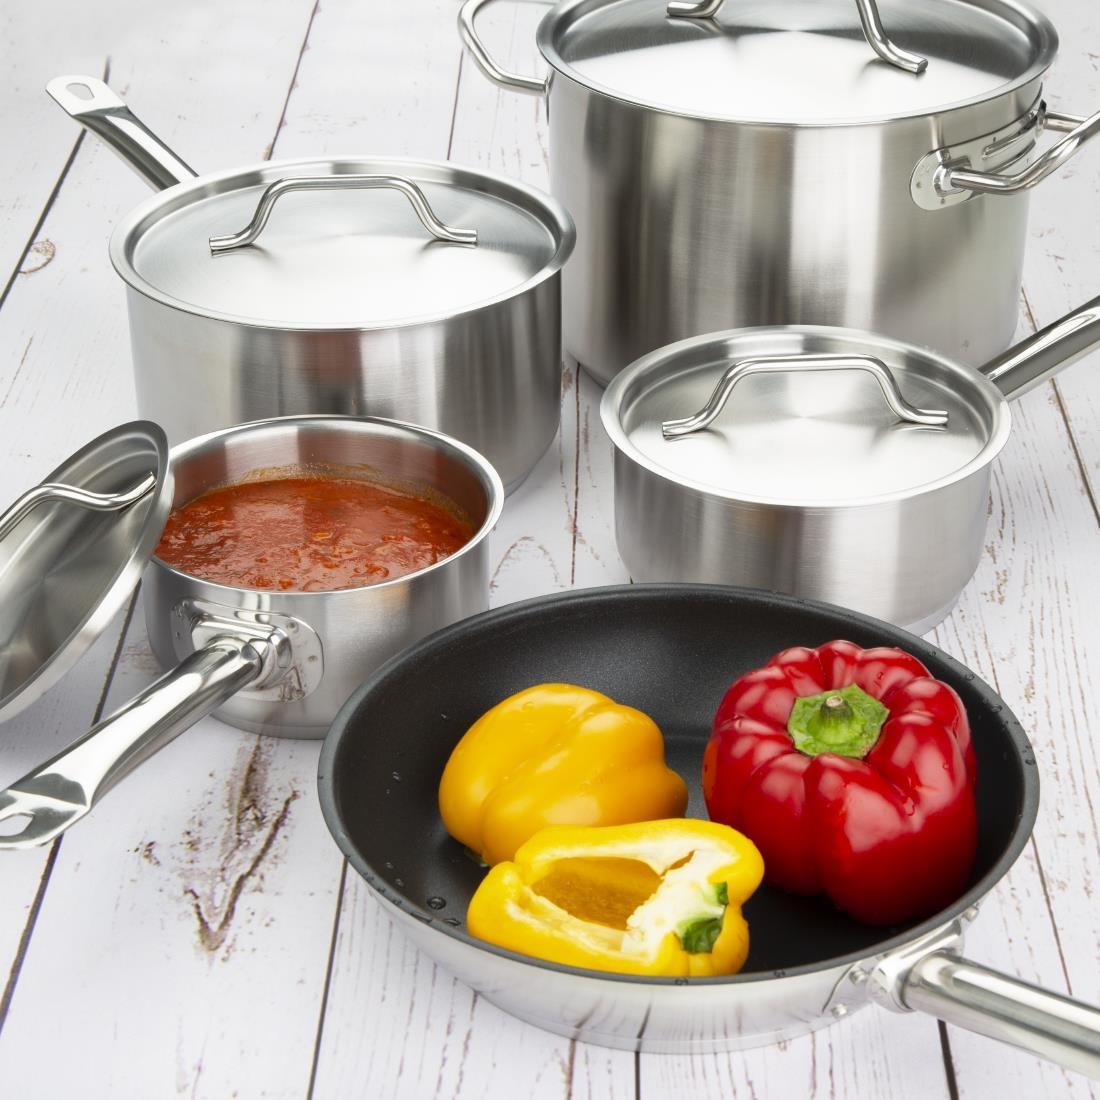 Vogue Cook Like A Pro 5-Piece Stainless Steel Induction Cookware Set